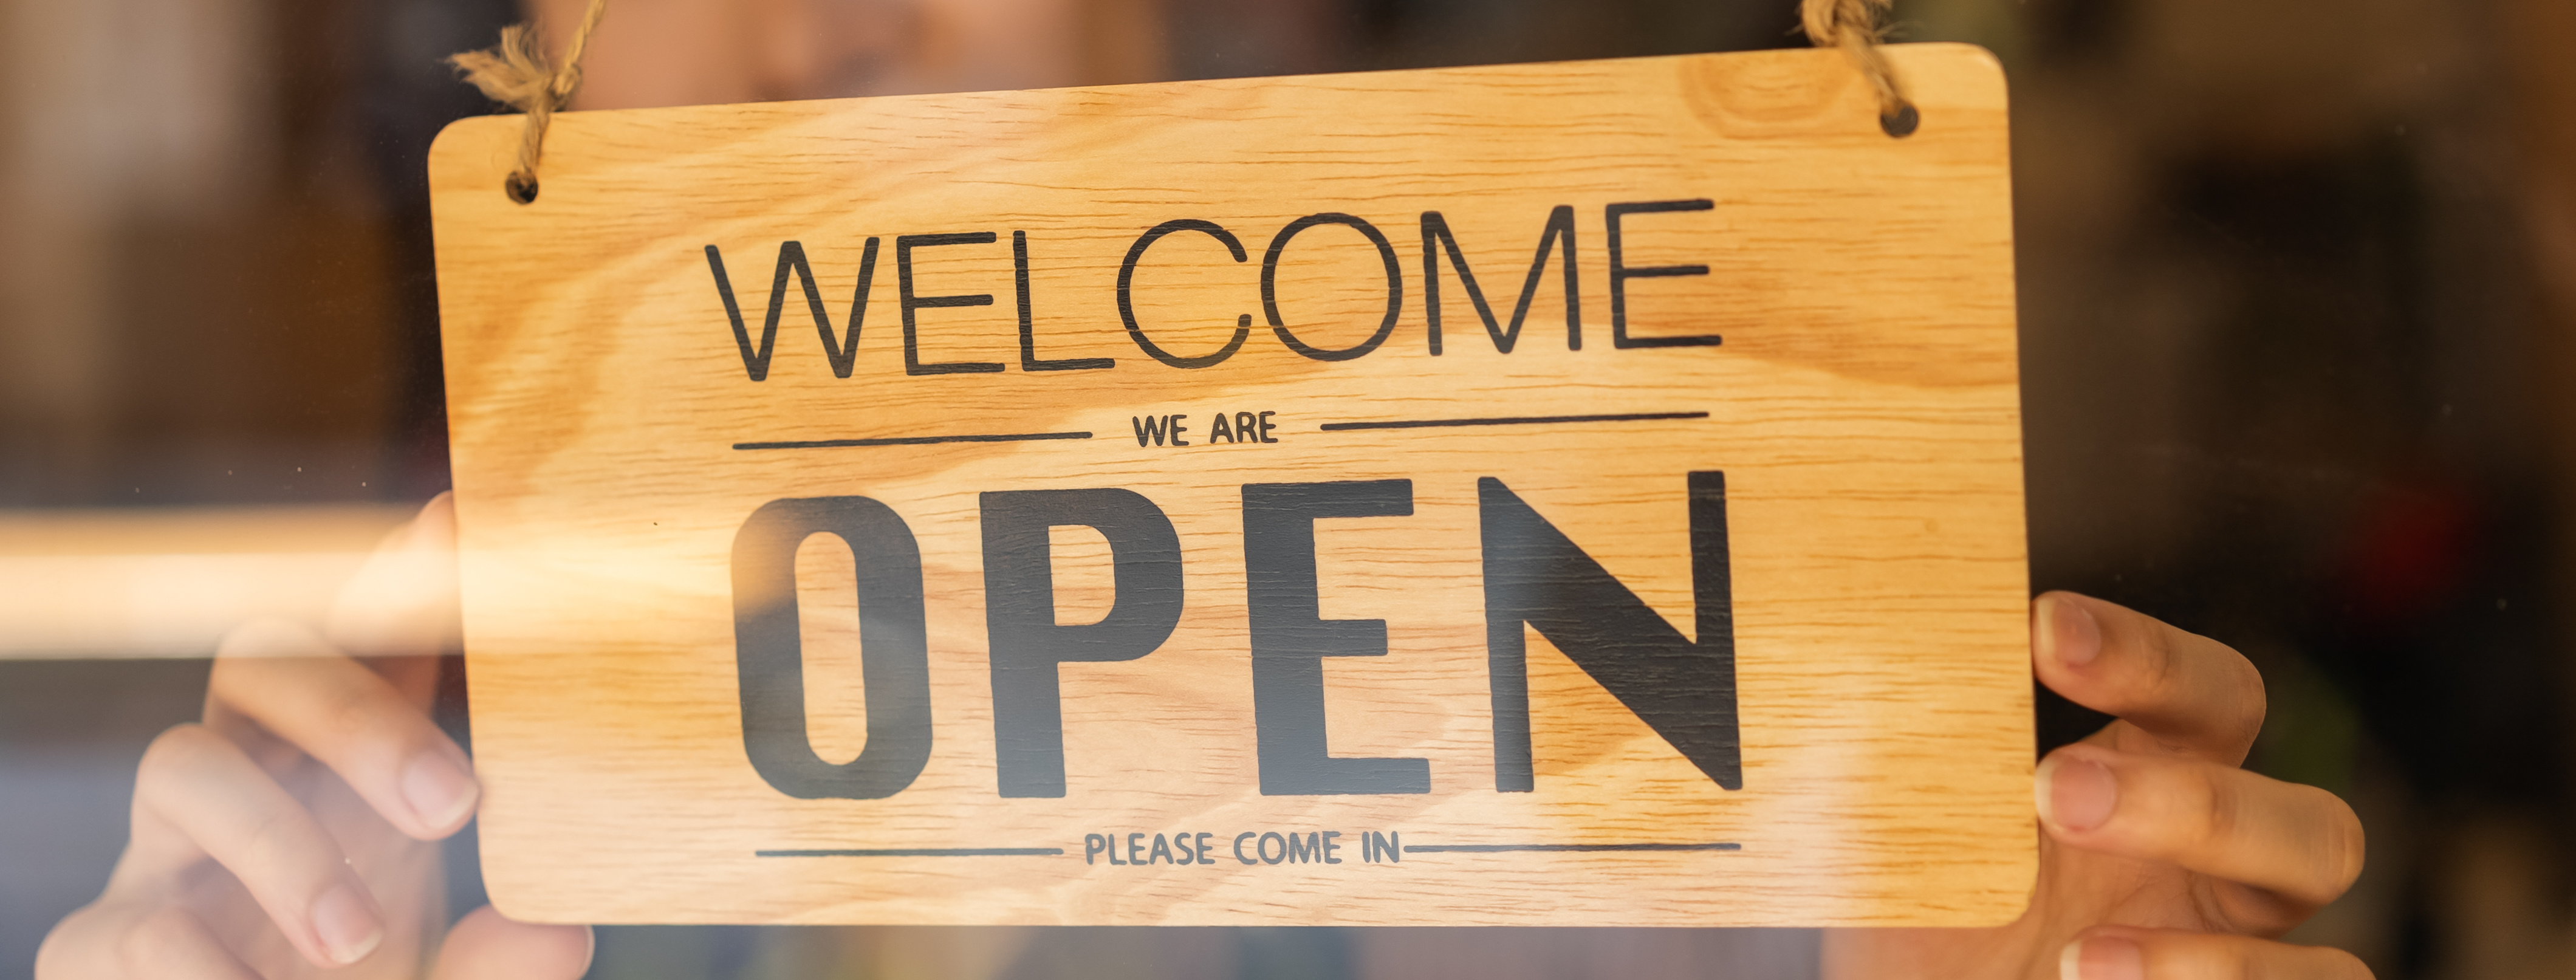 Welcome, we are open sign in window